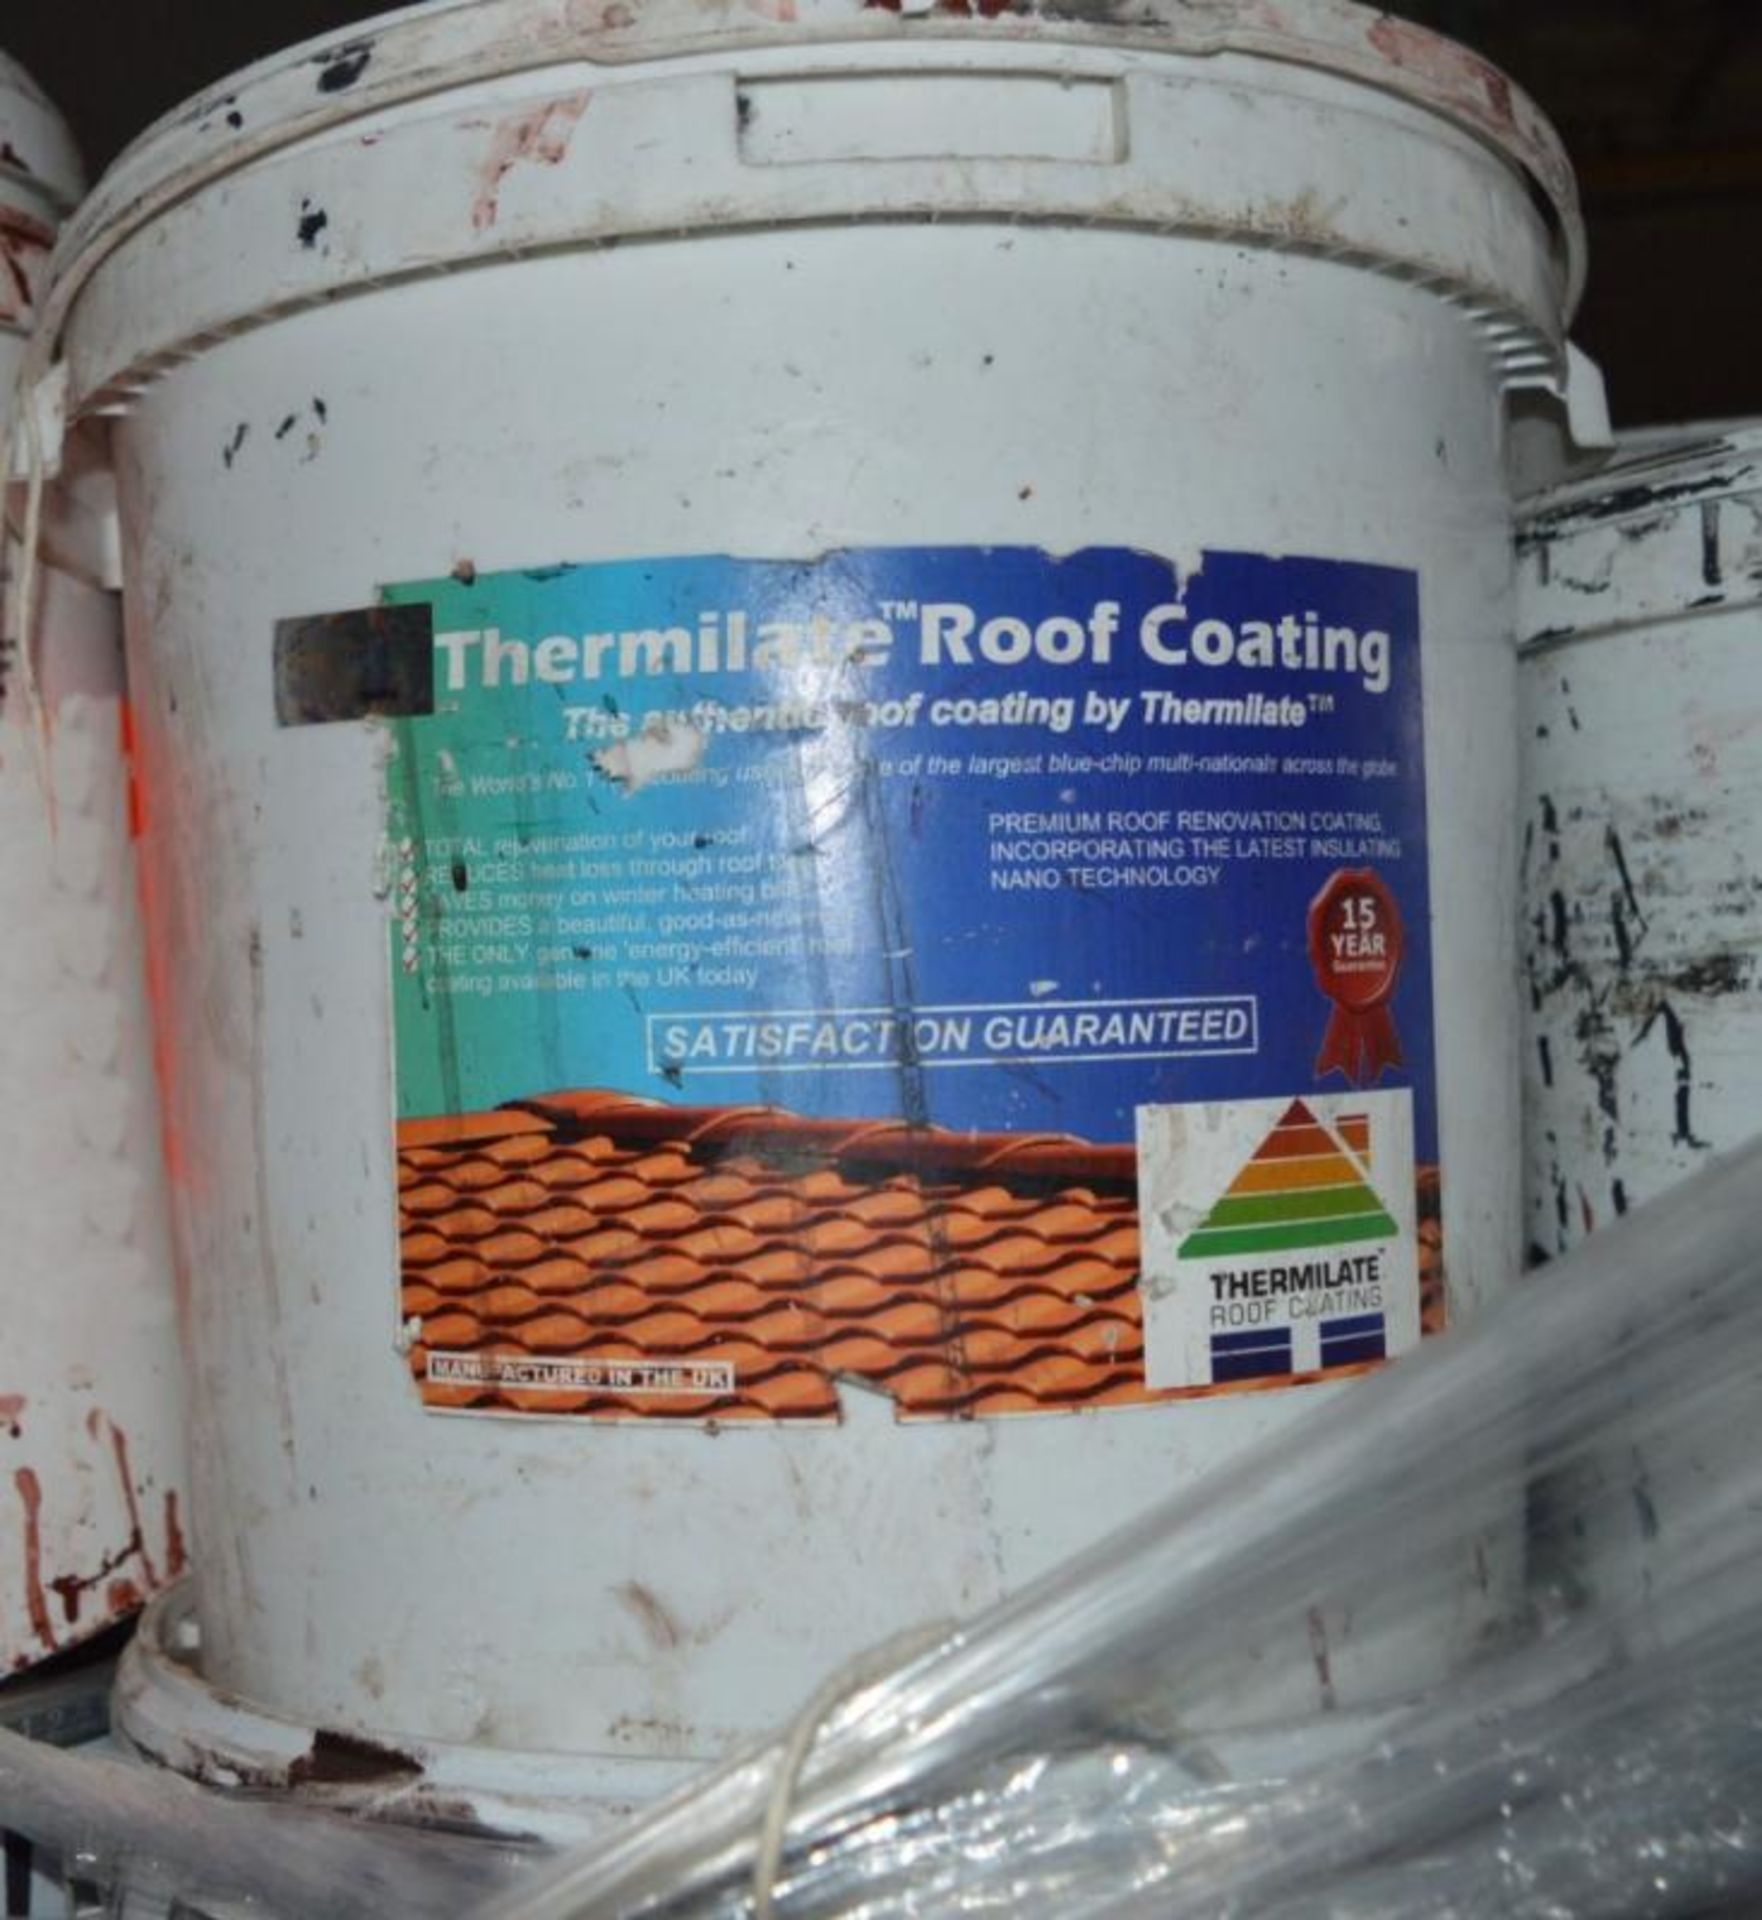 Approx. 36 x 20 Litre Assorted Tins of Paint inc. Roof & Tile, Thermilate + More - Ref: DRT0234 - - Image 2 of 3